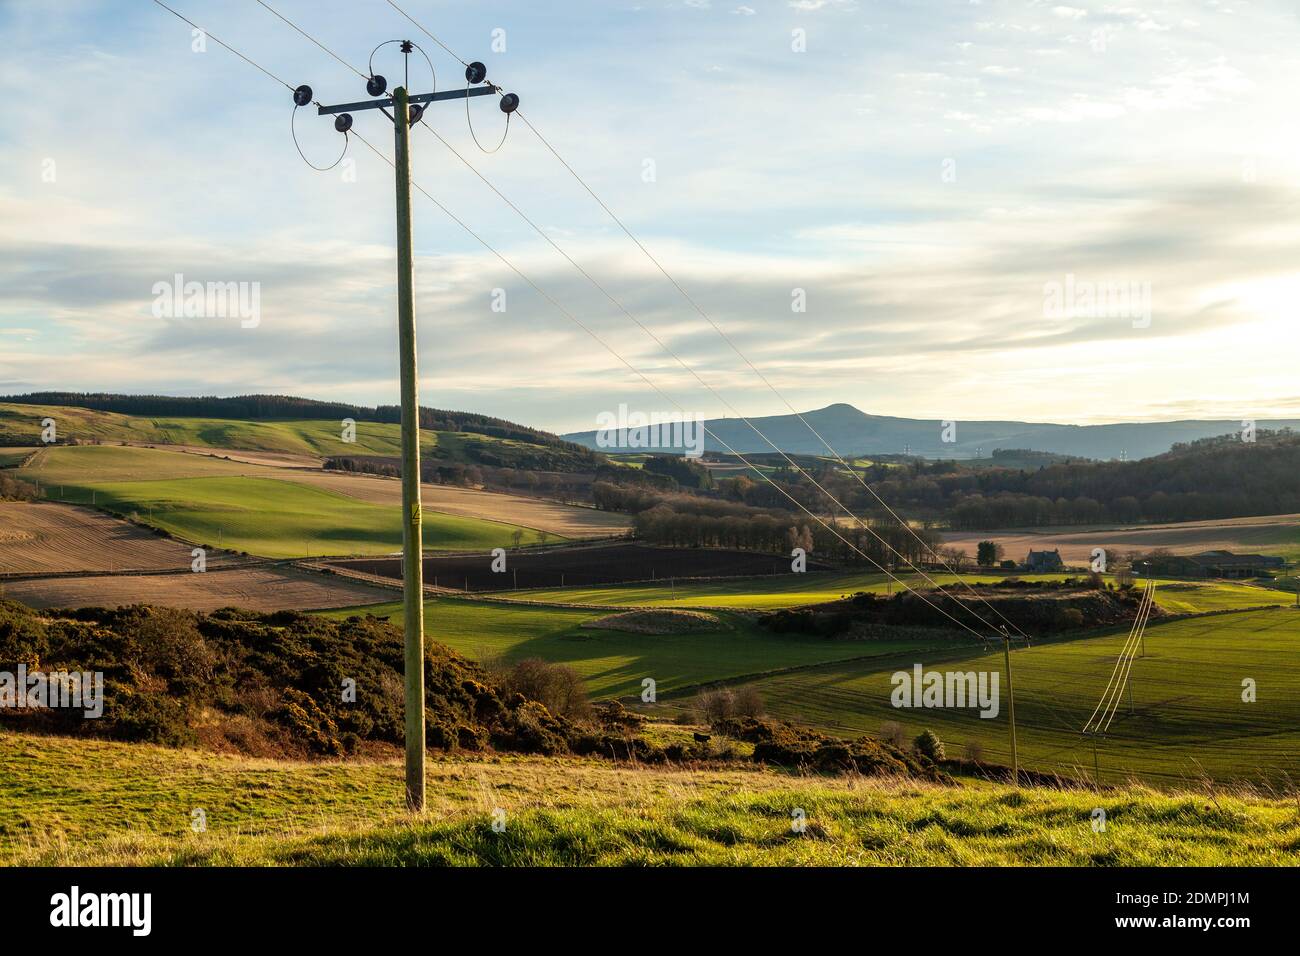 Telephone post and wires in a rural Fife landscape near Newburgh. Stock Photo